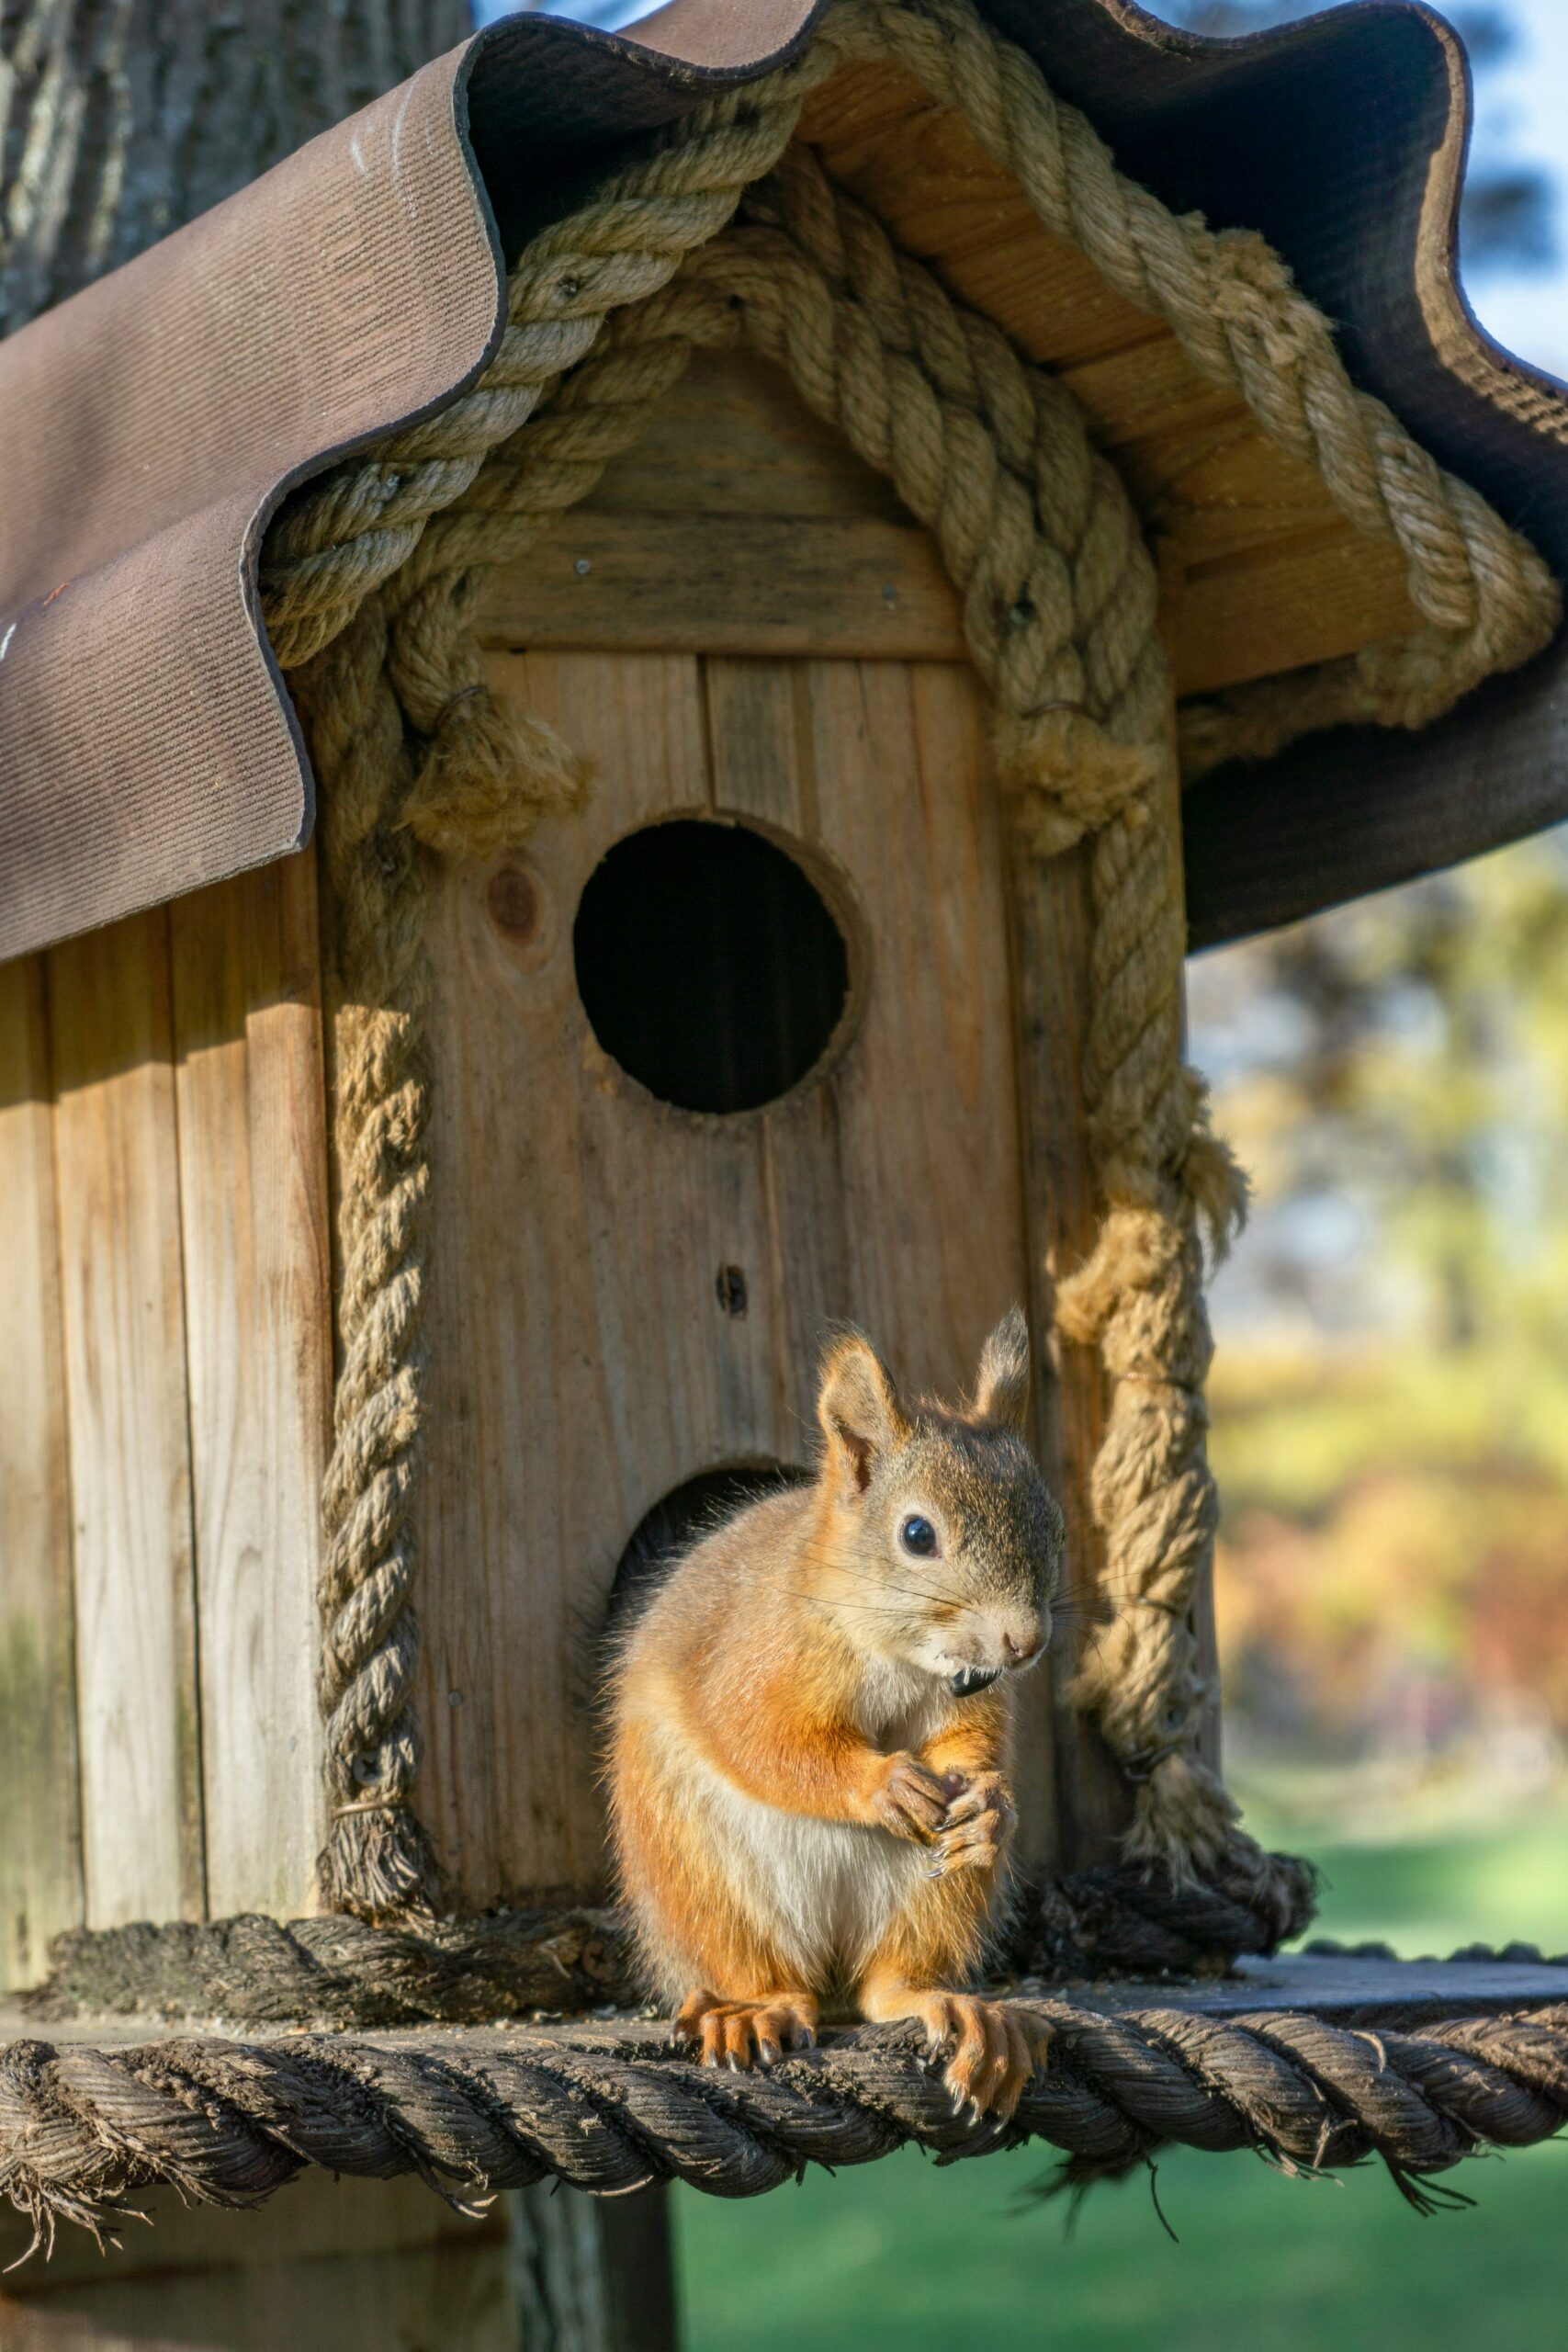 Attic Intruders: Squirrels and Rodents on the Loose

Rodents, squirrels, pest control, termites, rats, mosquitos, service plan, spring critters, critters in attic, home services